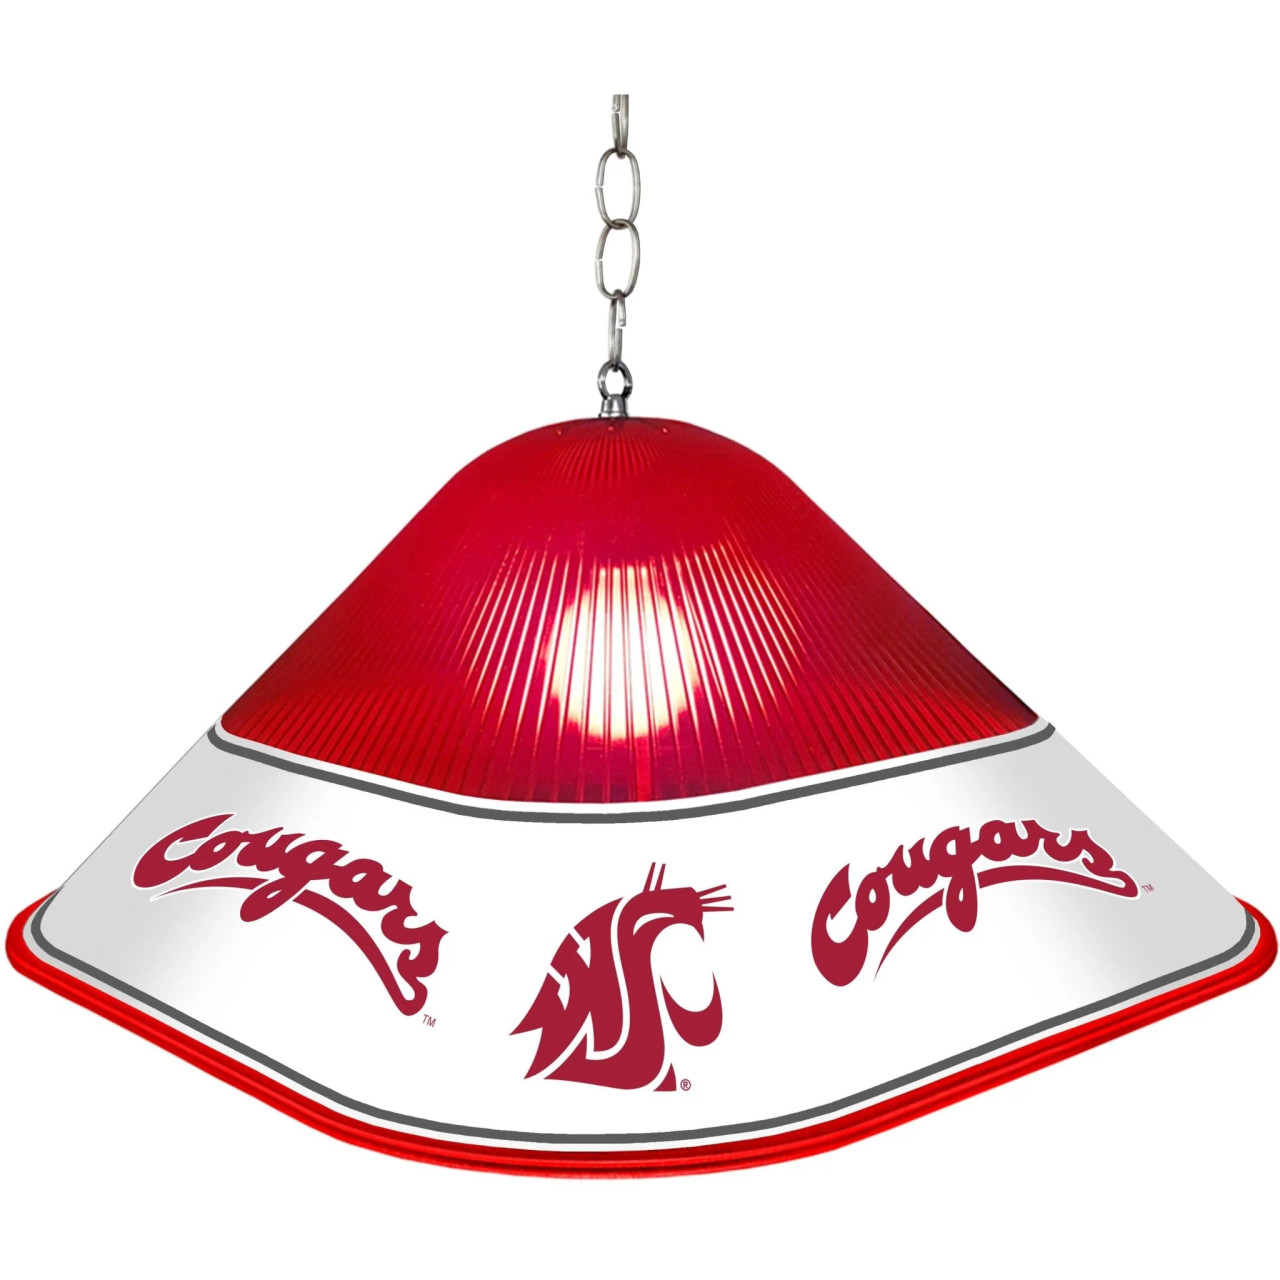 Washington, Was, Wash, St, State, Cougars, Game, Room, Cave, Table, Light, Lamp,NCWAST-410-01A, NCWAST-410-01B, The Fan-Brand, 687747755495